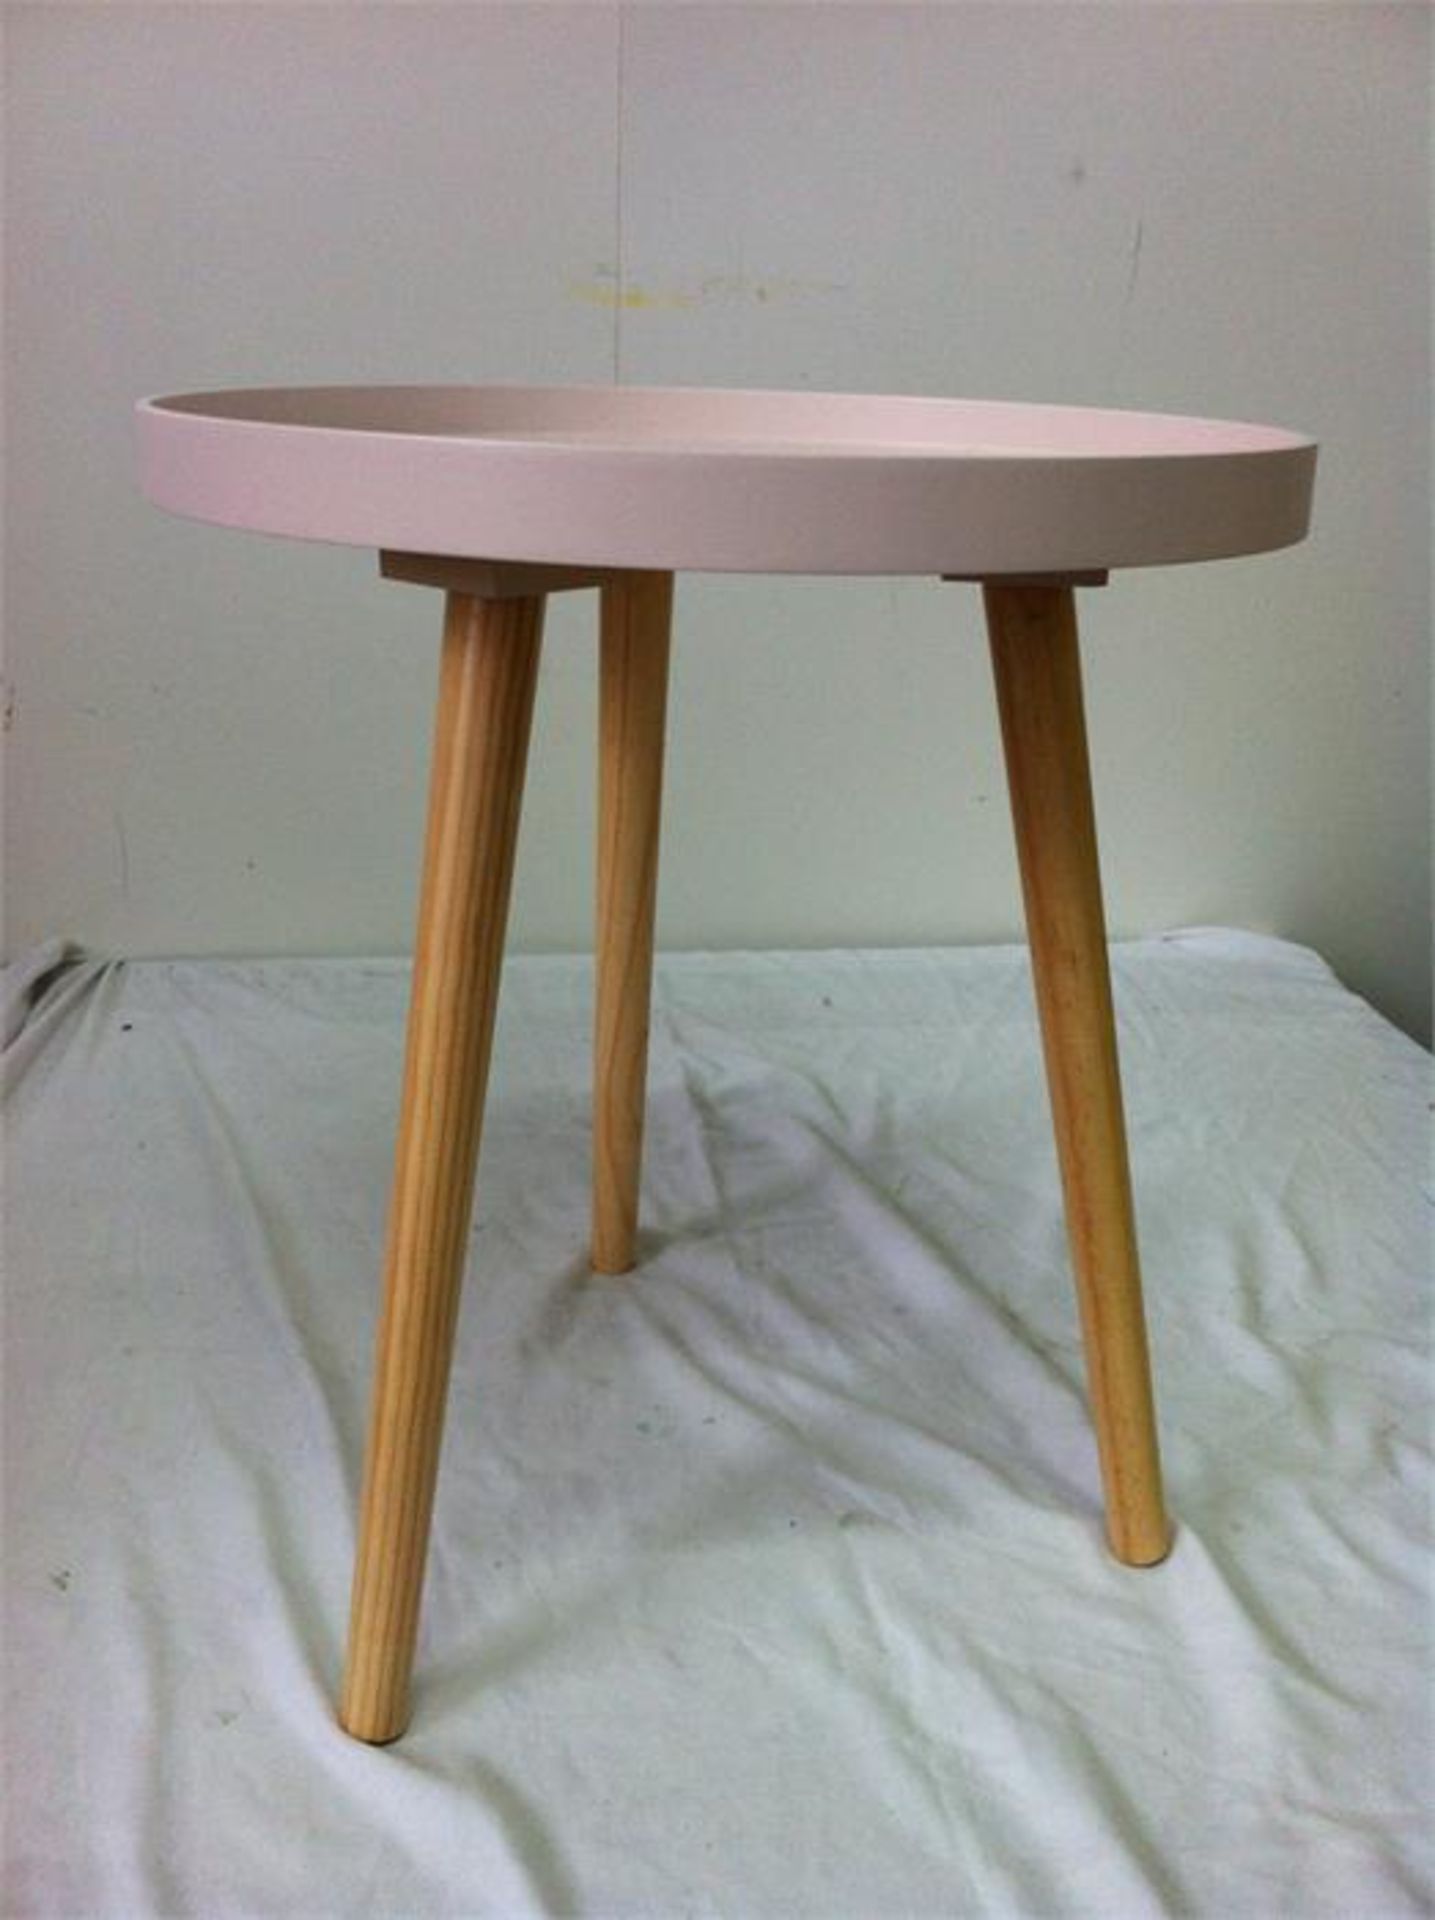 5 x Small round table with pine legs 40 cm dia/35 cm dia. Total RRP £164.95